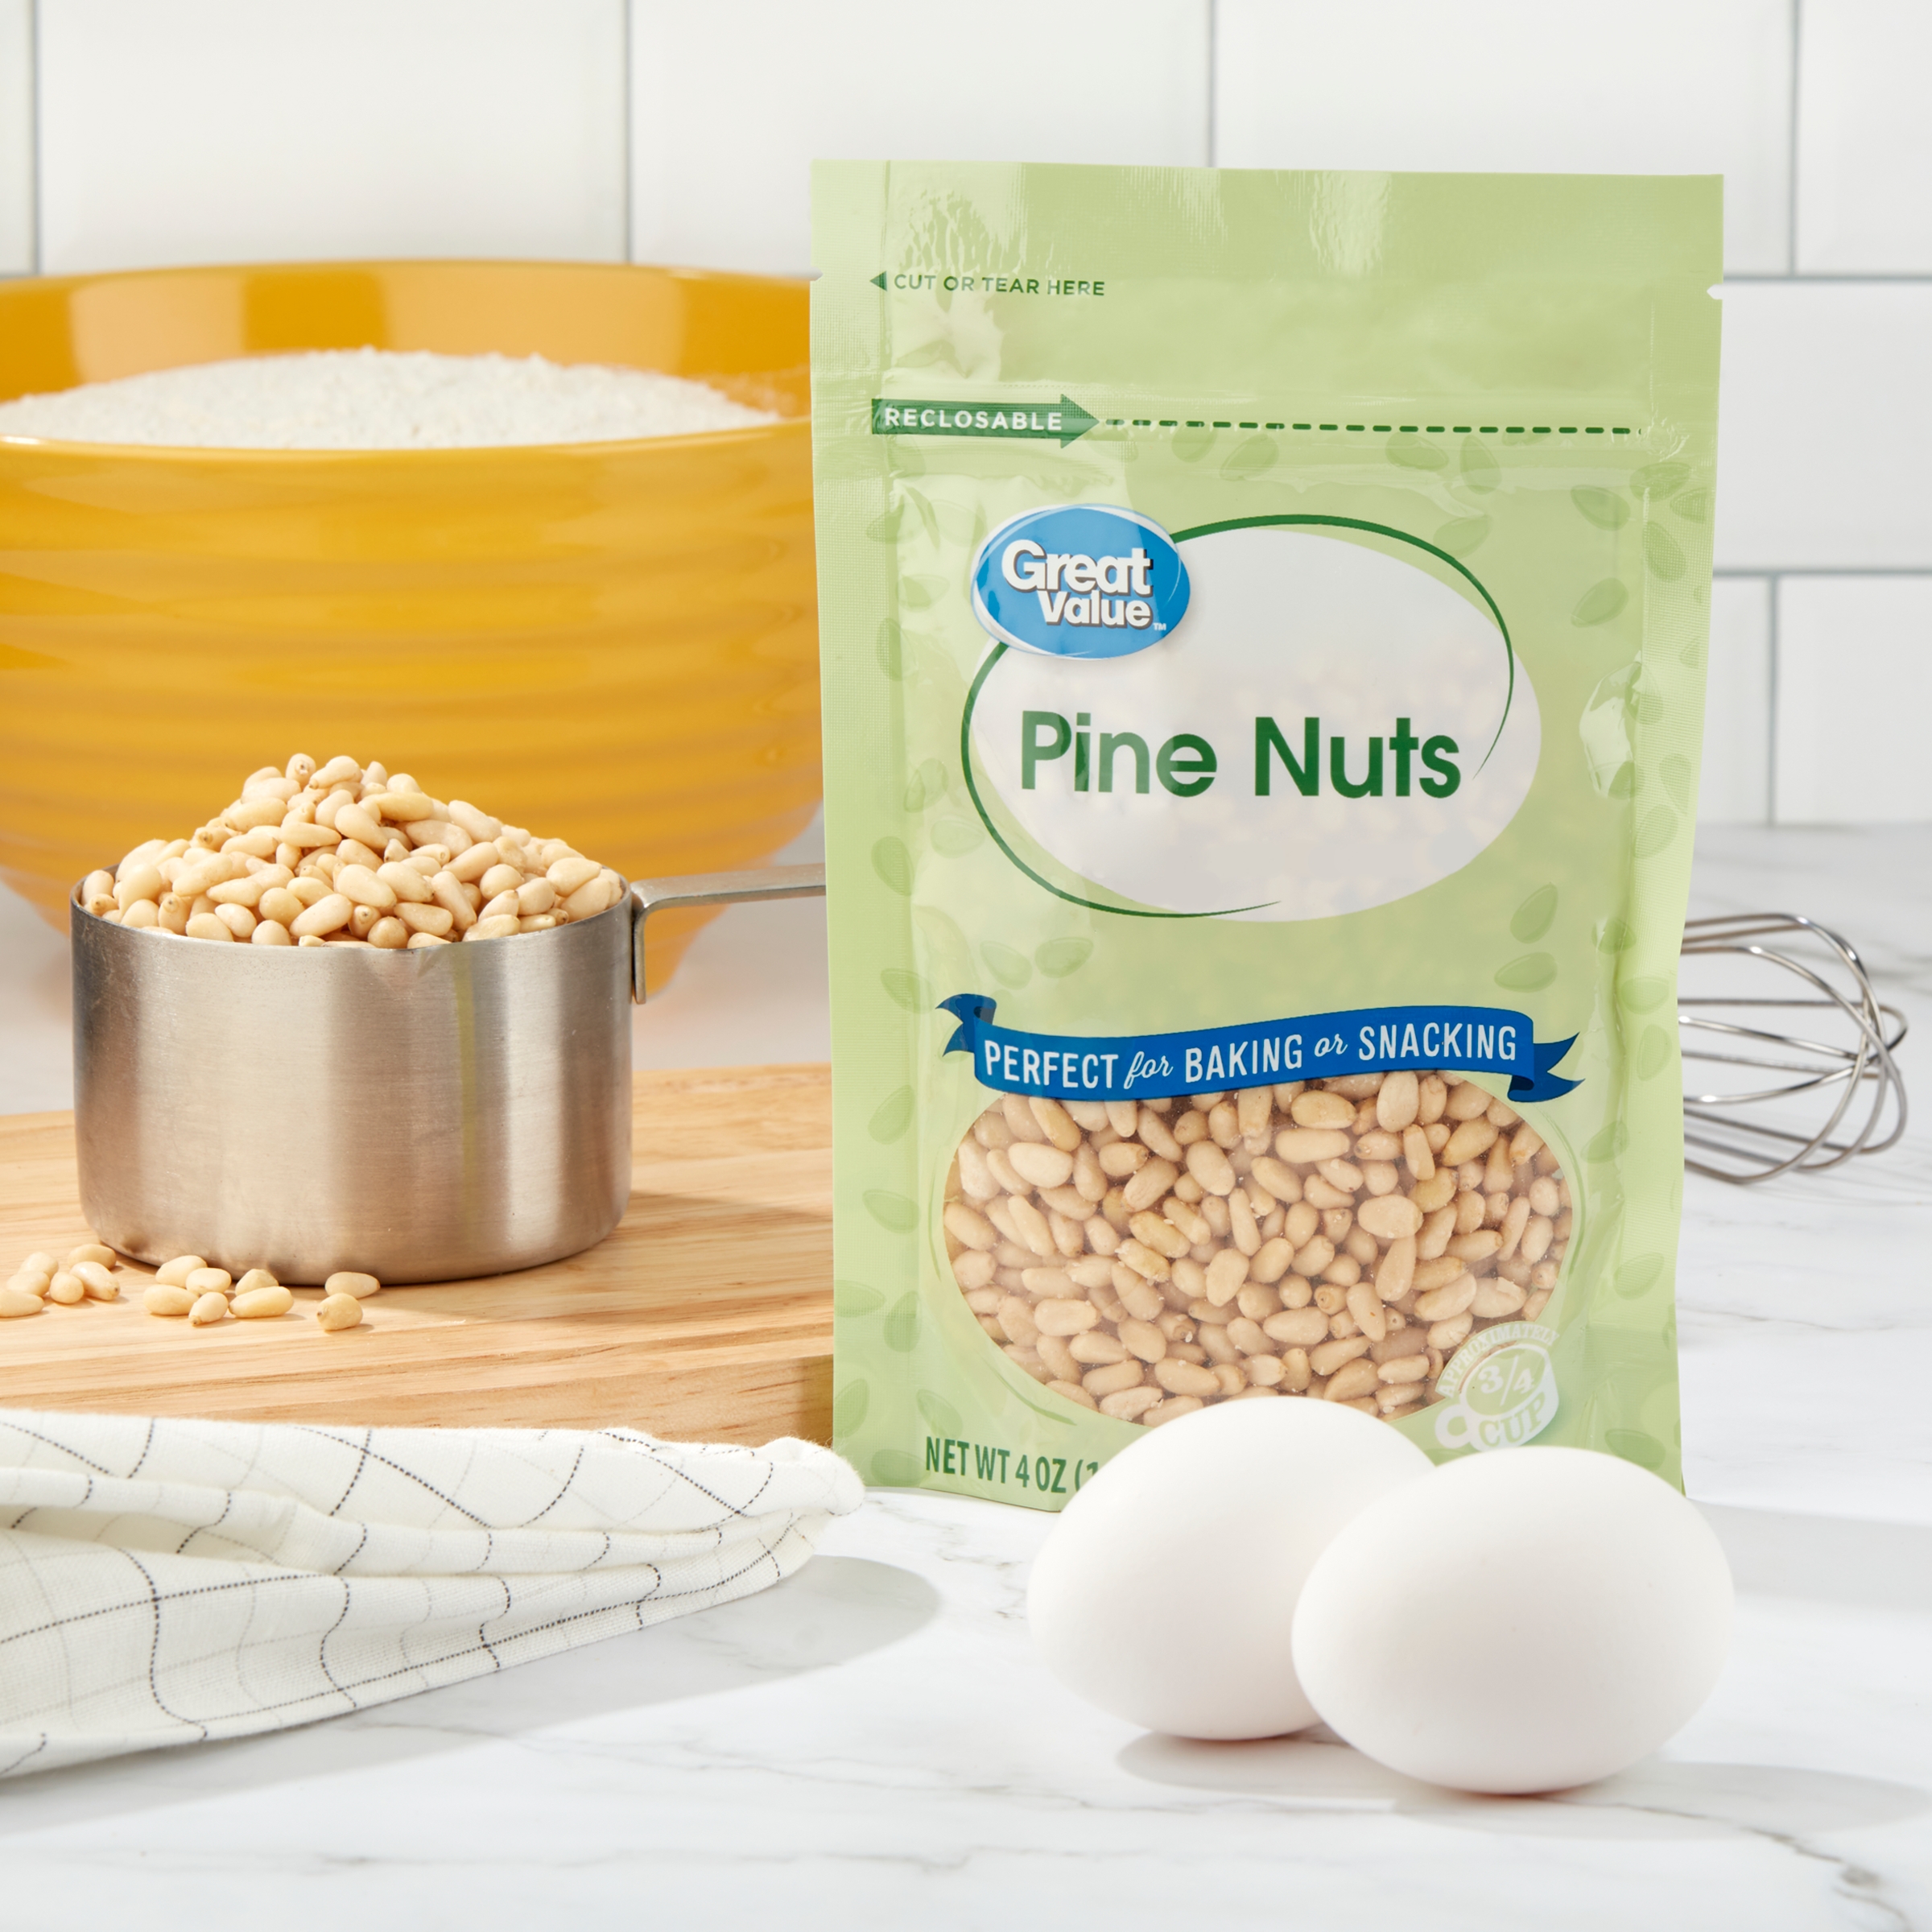 Great Value Pine Nuts, 4 oz - image 2 of 8